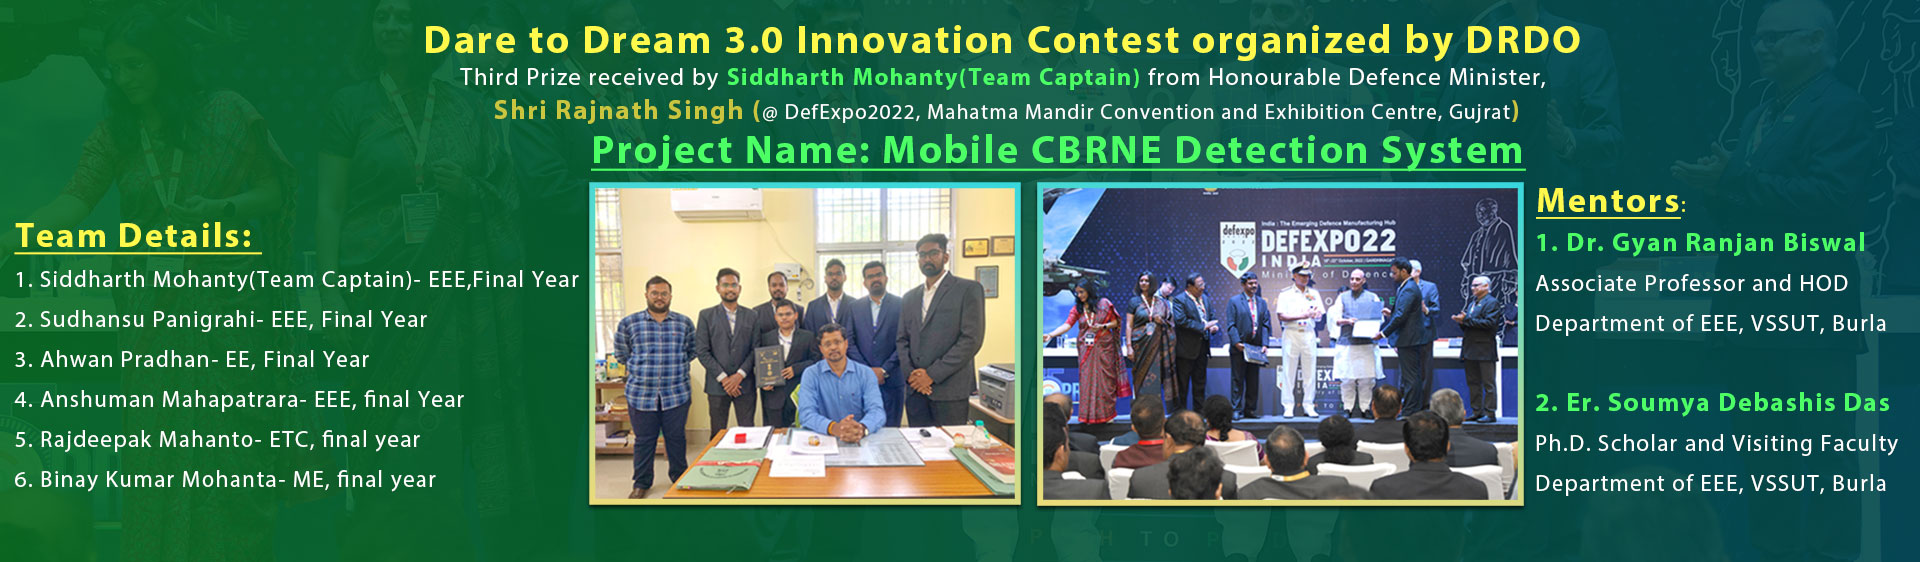 Students of VSSUT has won Dare to Dream 3.0 Innovation Contest organized by DRDO